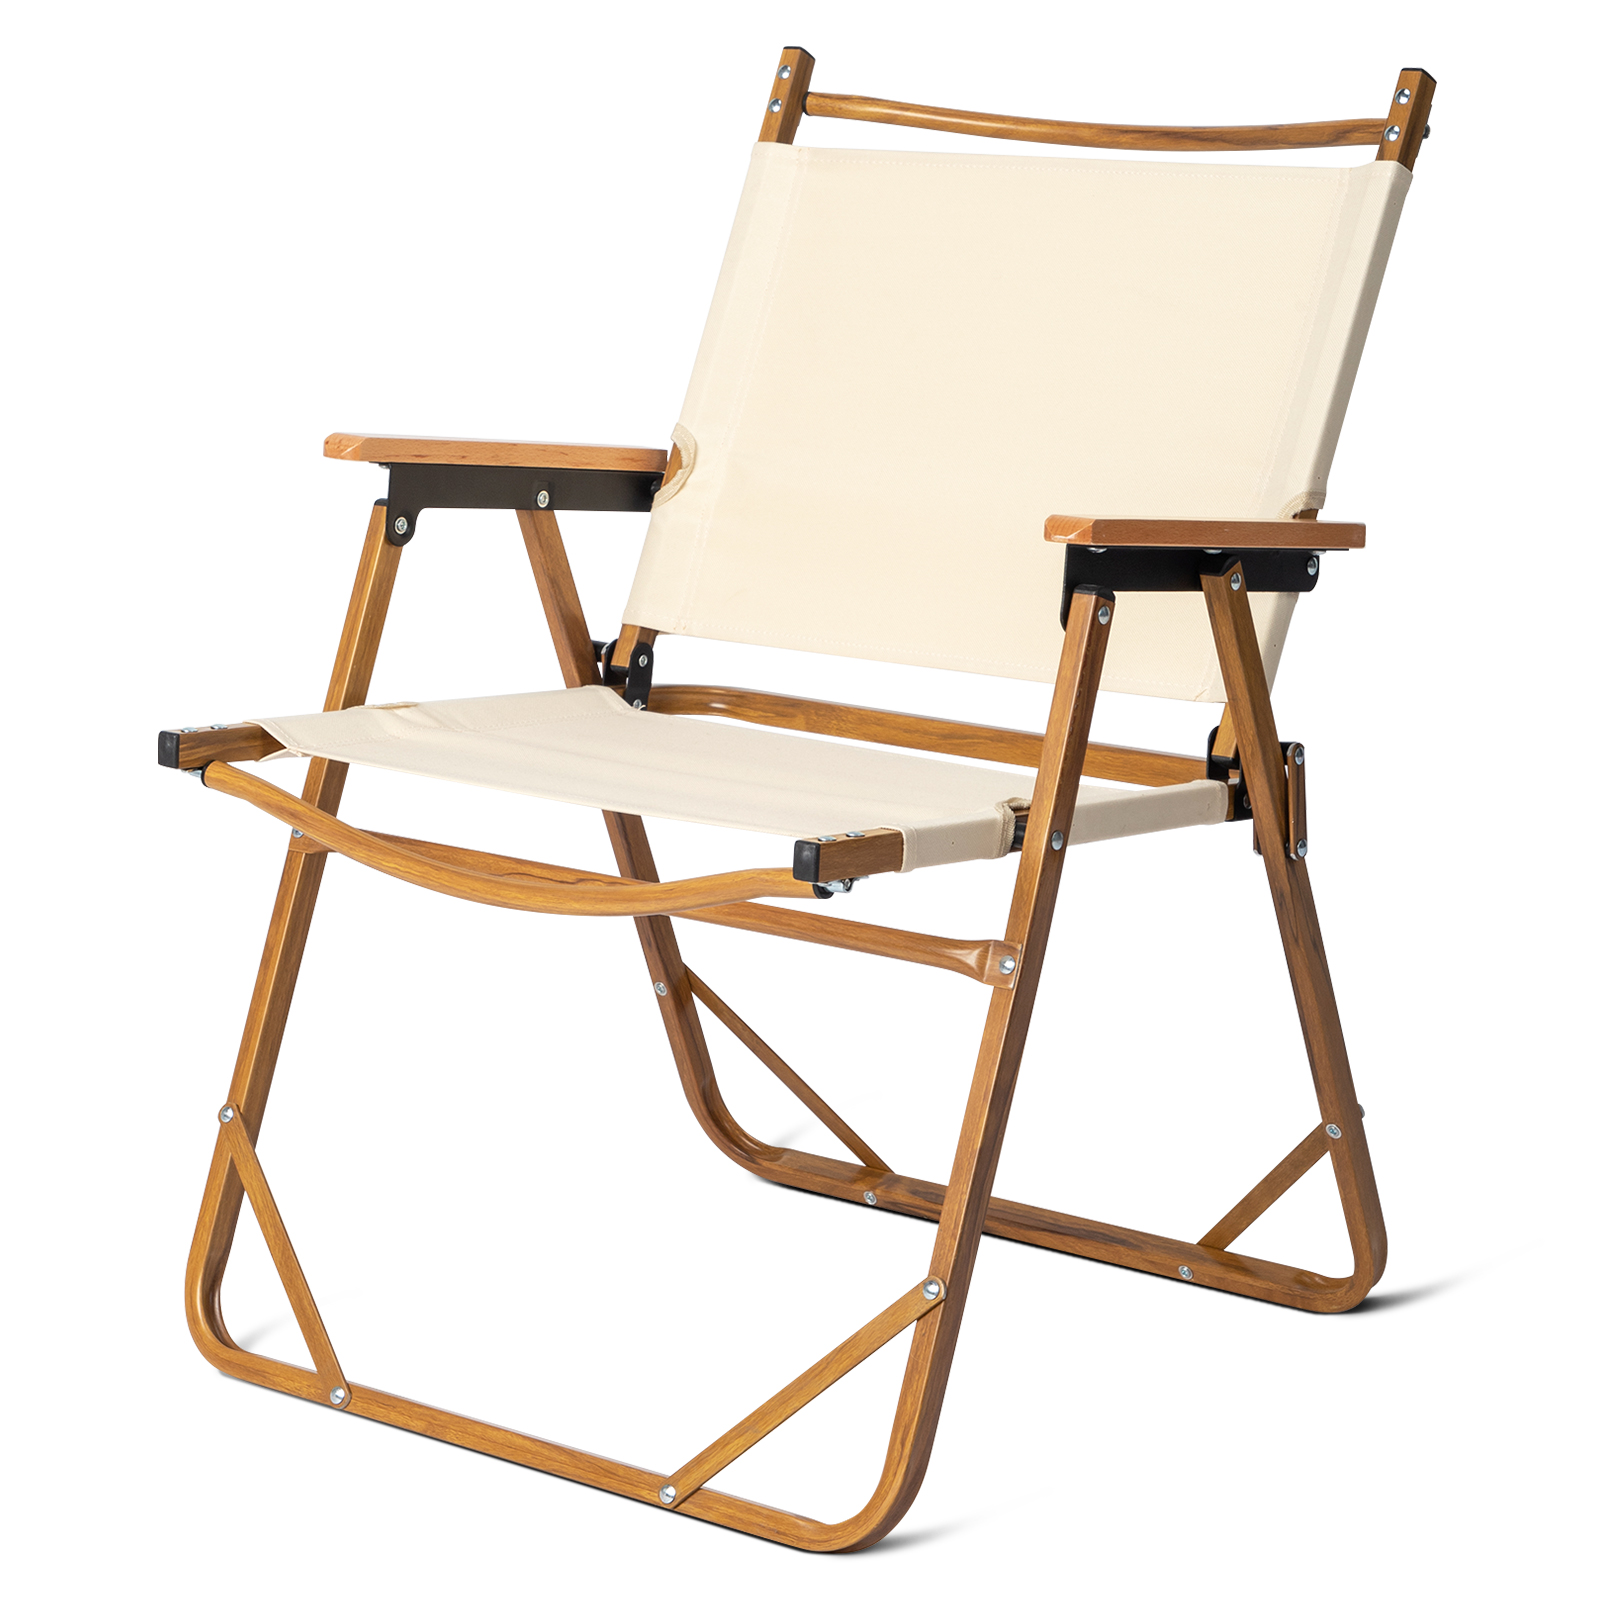 UBesGoo Camping Chair Aluminum with Sports Chair, Outdoor Chair & Lawn Chair Beige - image 1 of 8